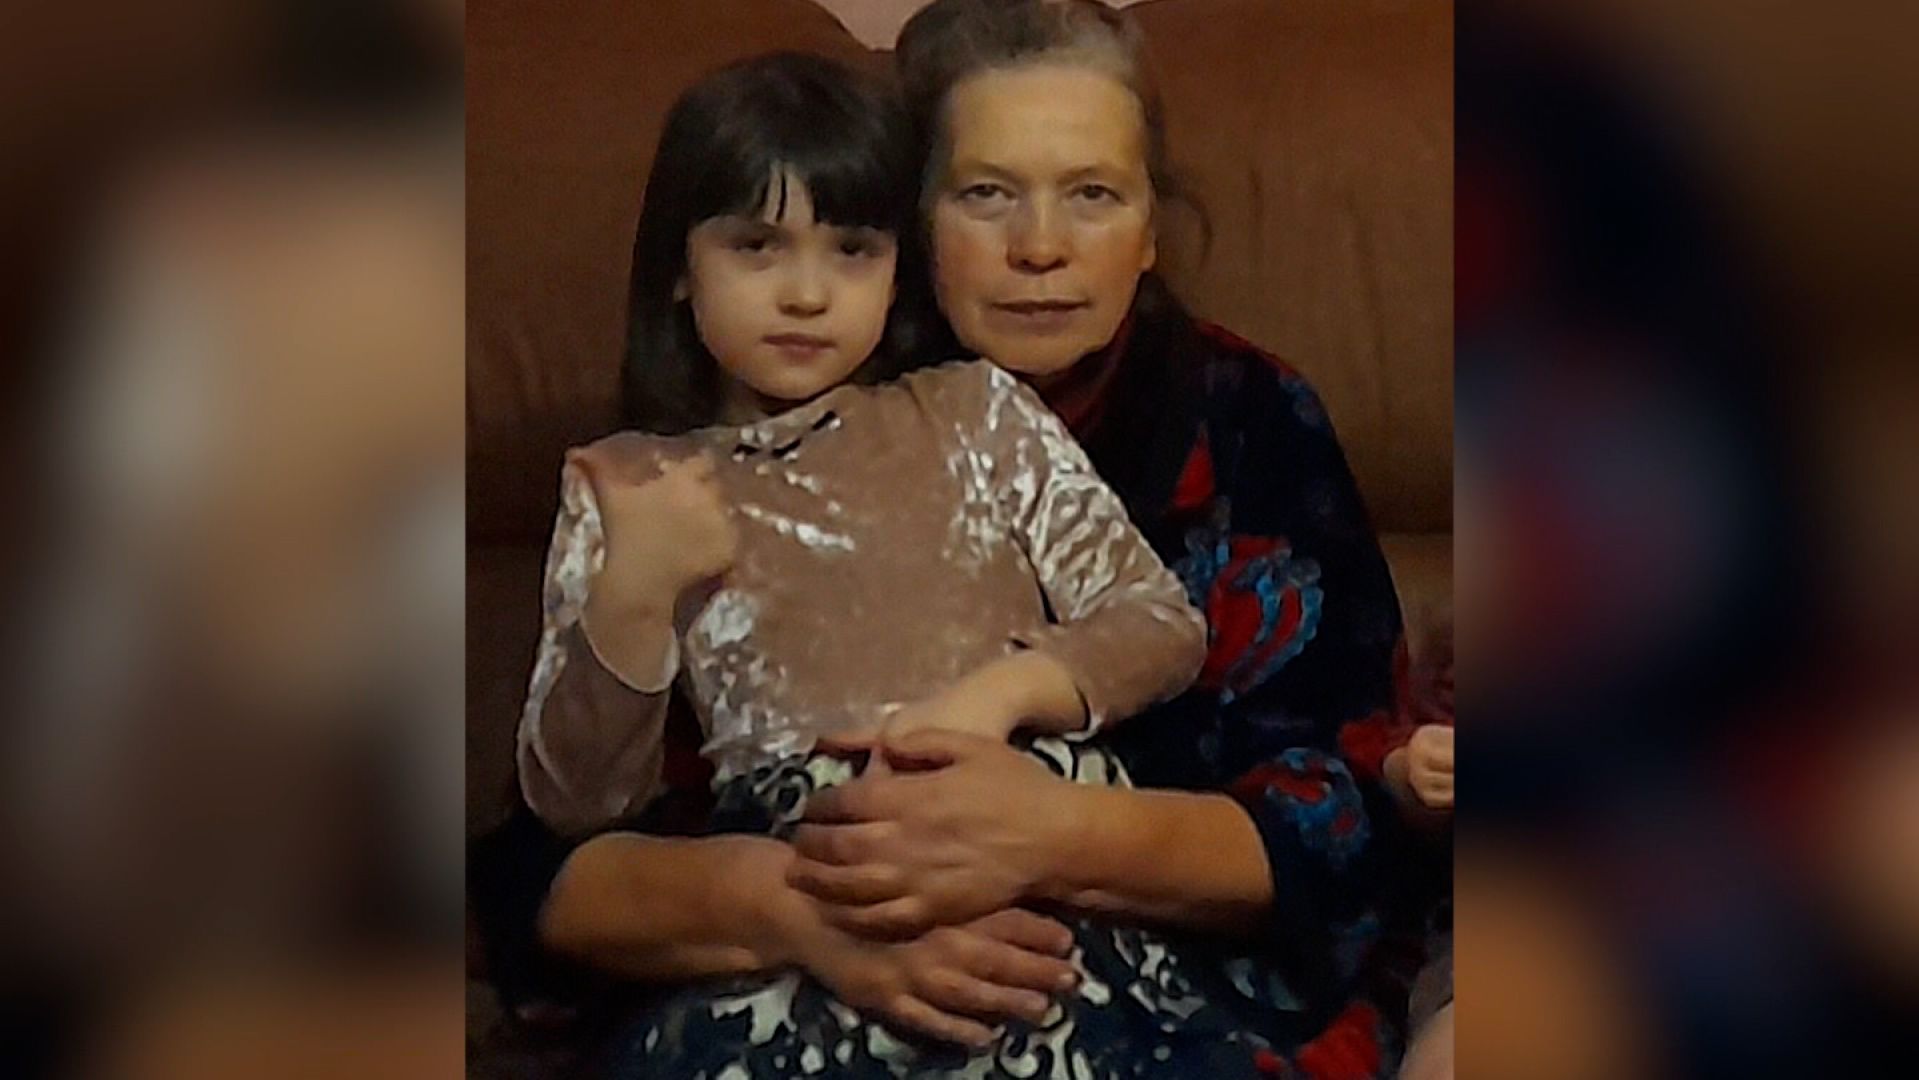 Galina and her granddaughter Anastasia, in happier times.